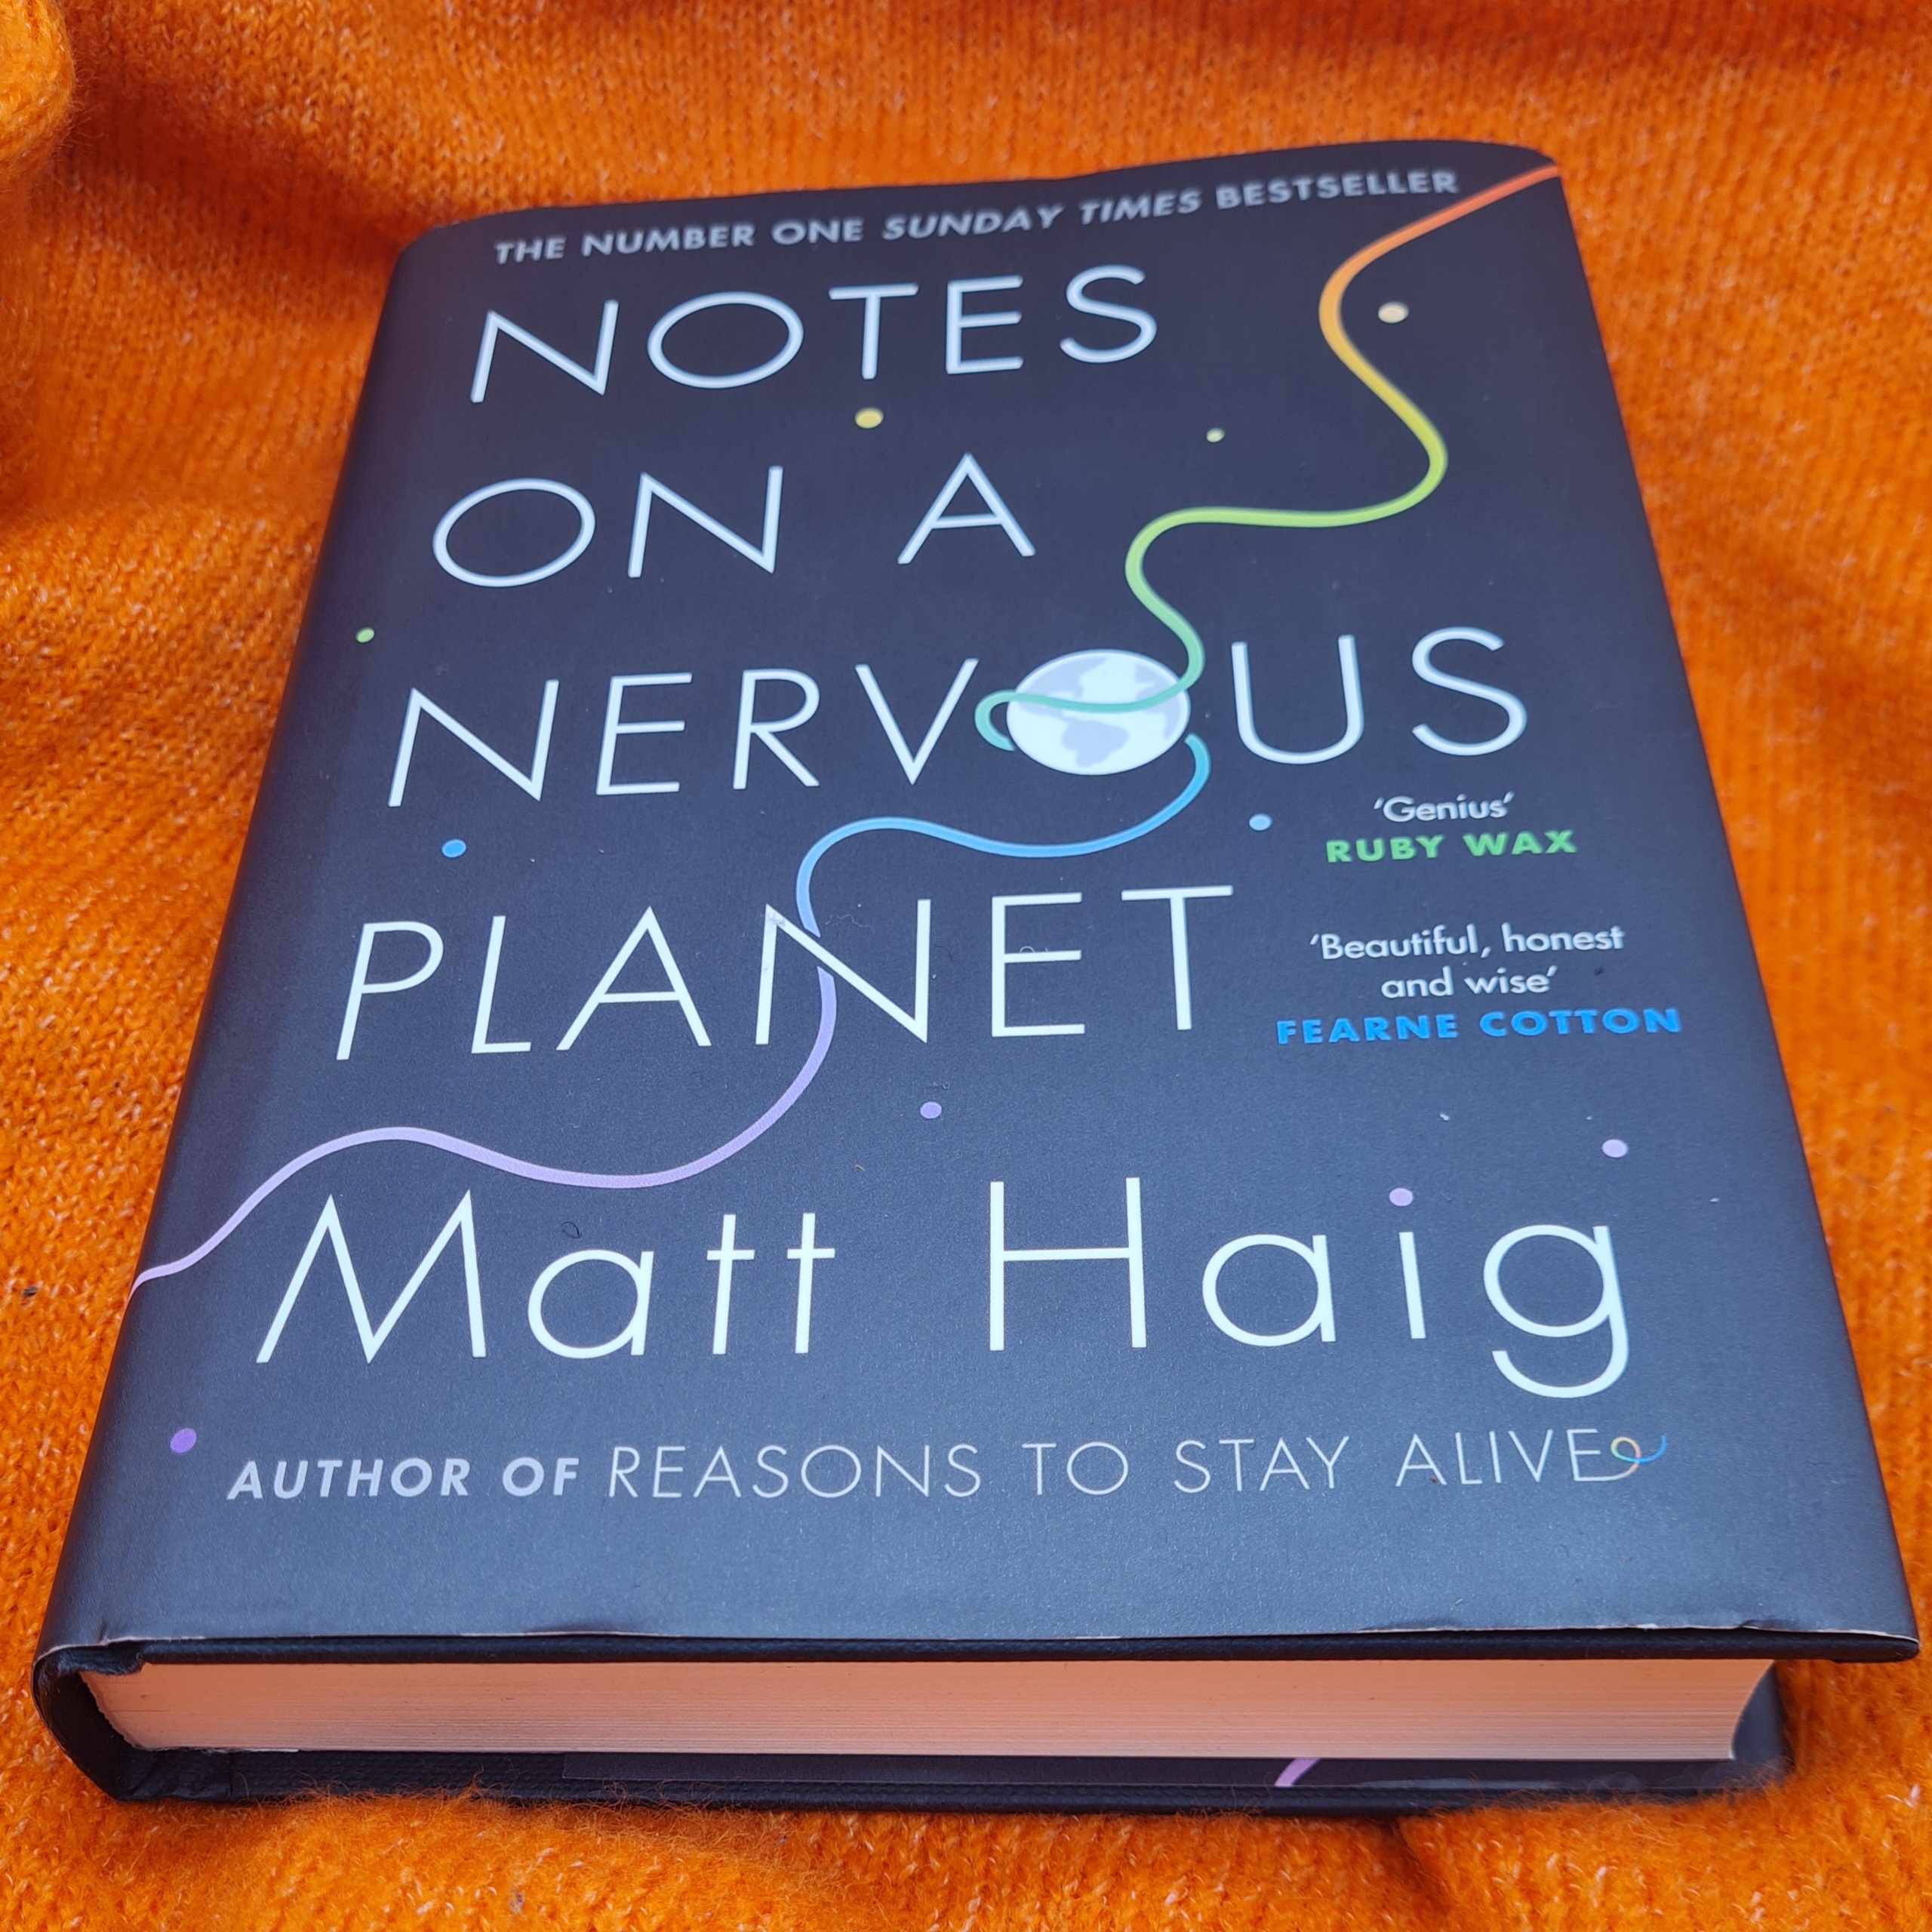 Photo of the book Notes on a Nervous Planet by Matt Haig on an orange background